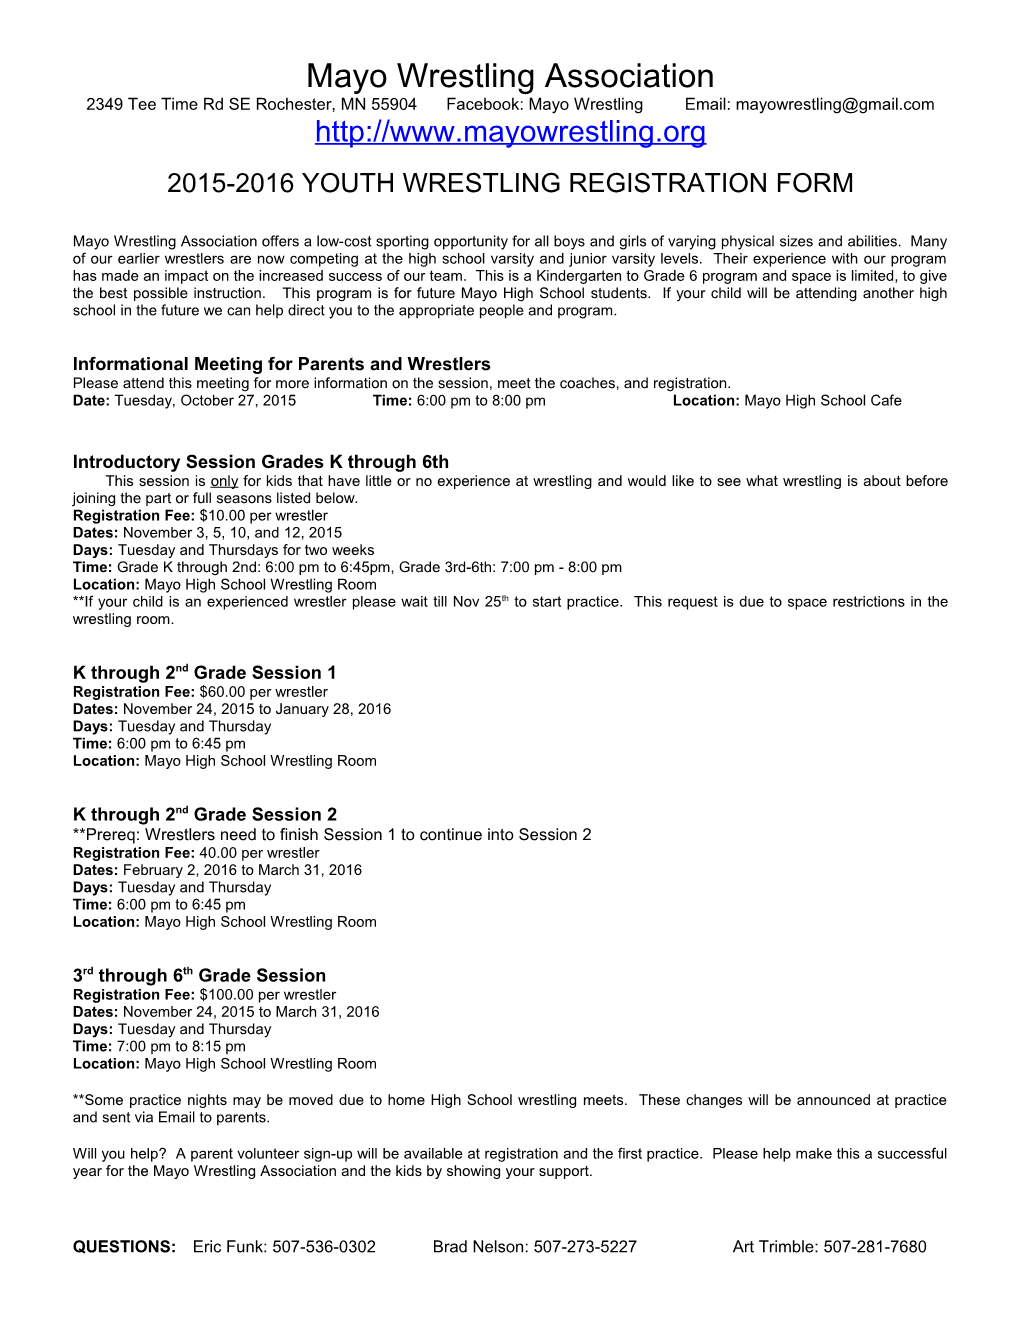 Rochester Youth Wrestling Association